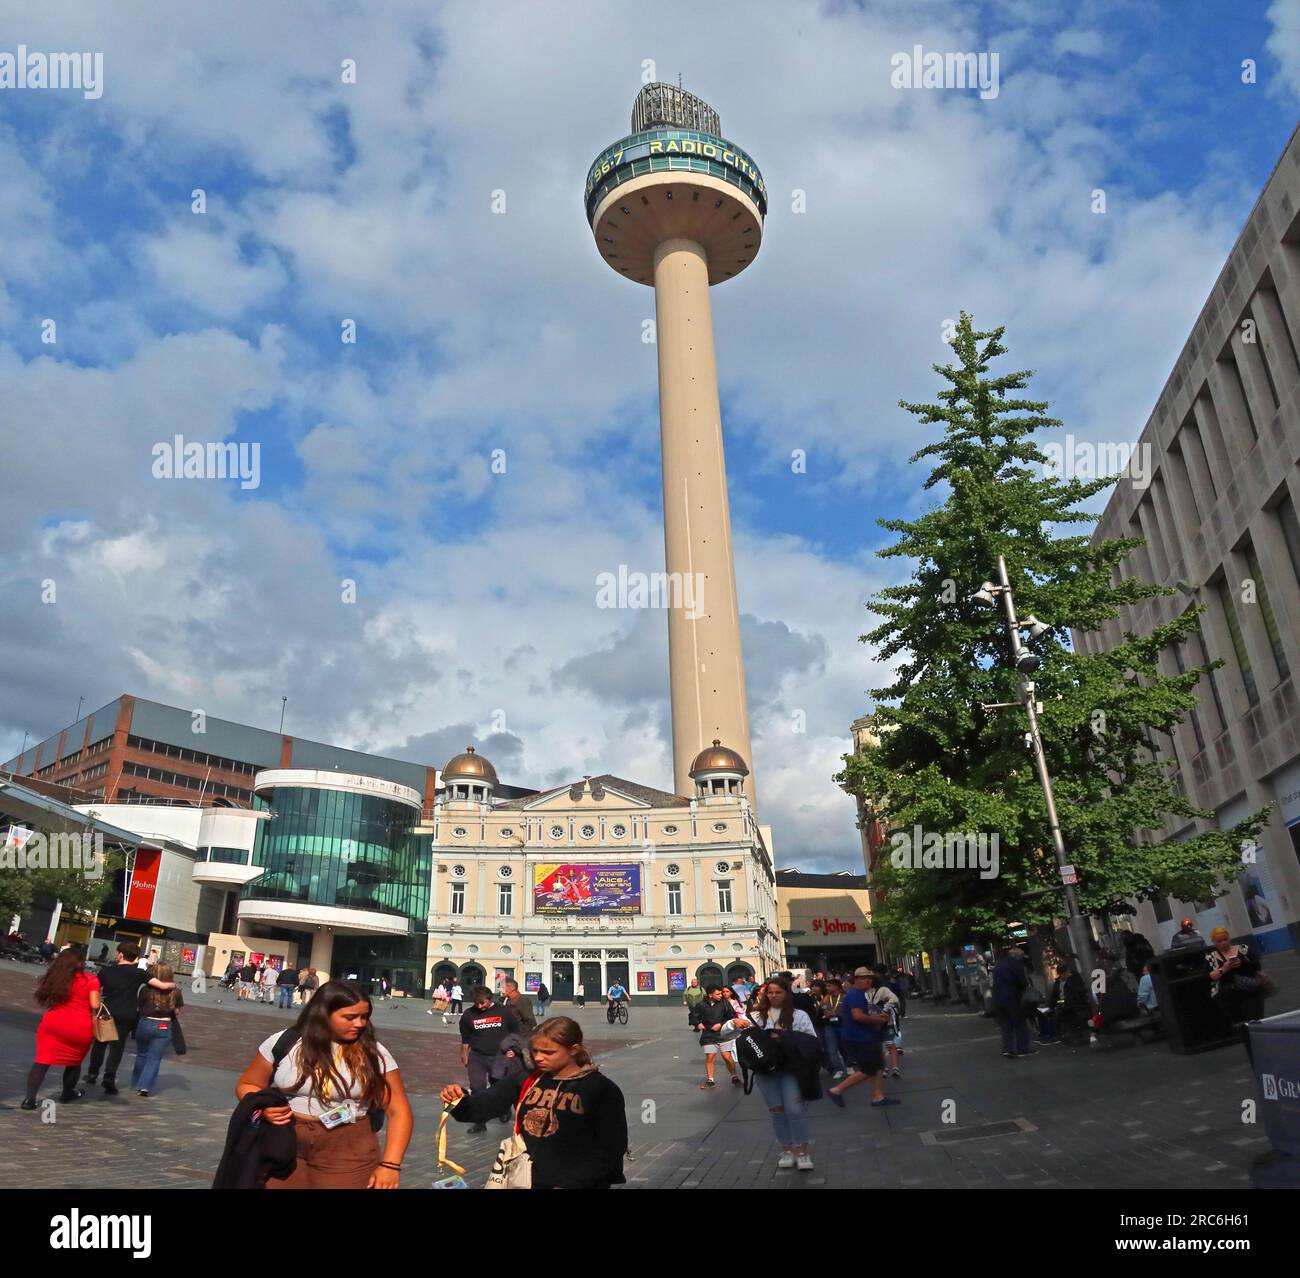 Le Liverpool Playhouse Theatre avec radio City Tower, Williamson Square, Liverpool, Merseyside, Angleterre, ROYAUME-UNI, L1 1EL Banque D'Images